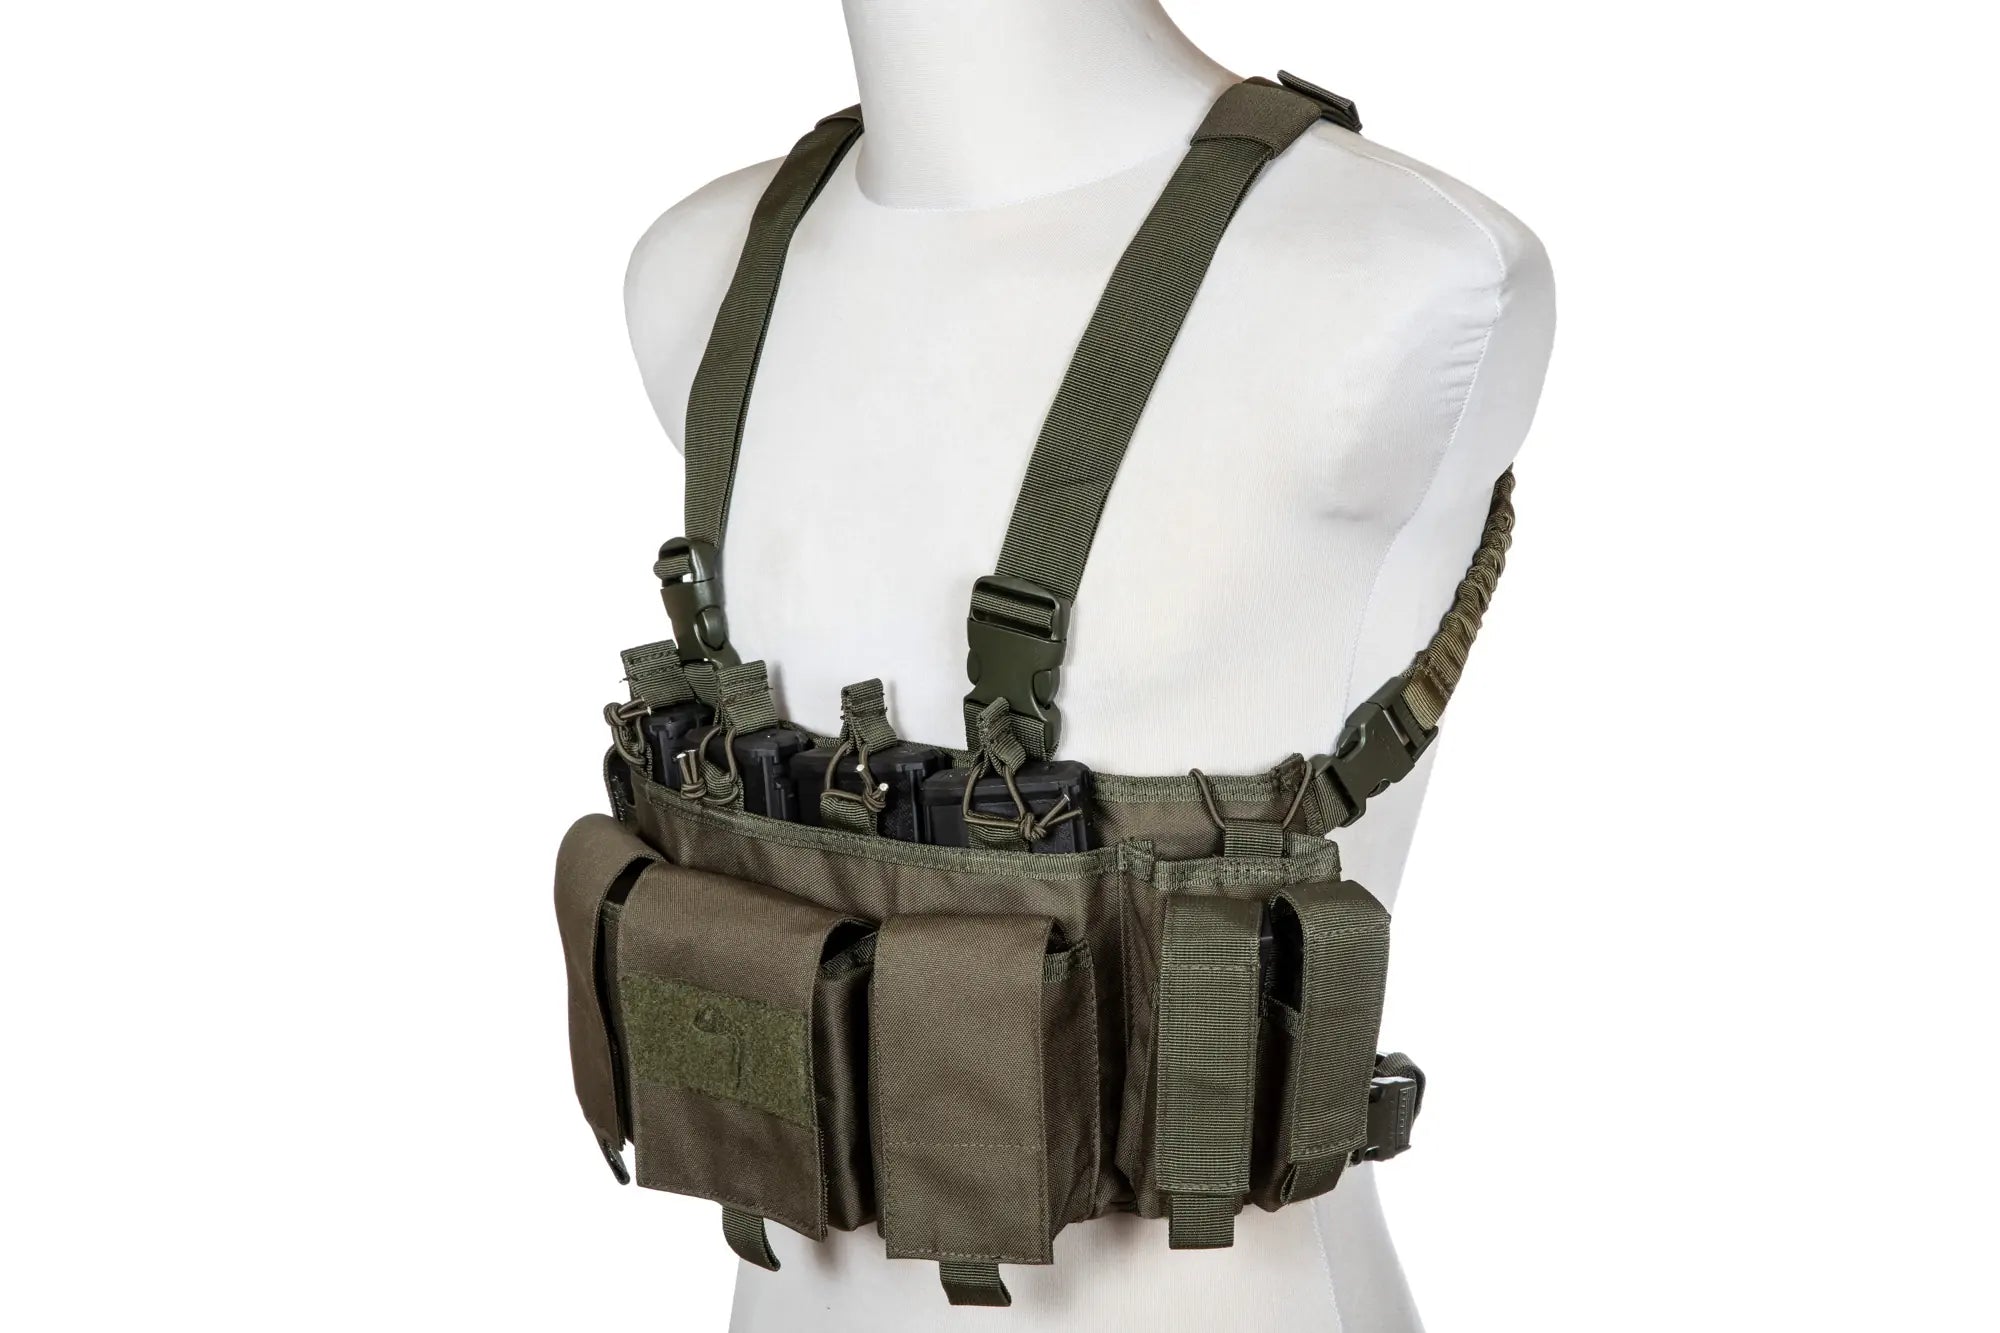 Special Ops Chestrig Tactical Vest - Green